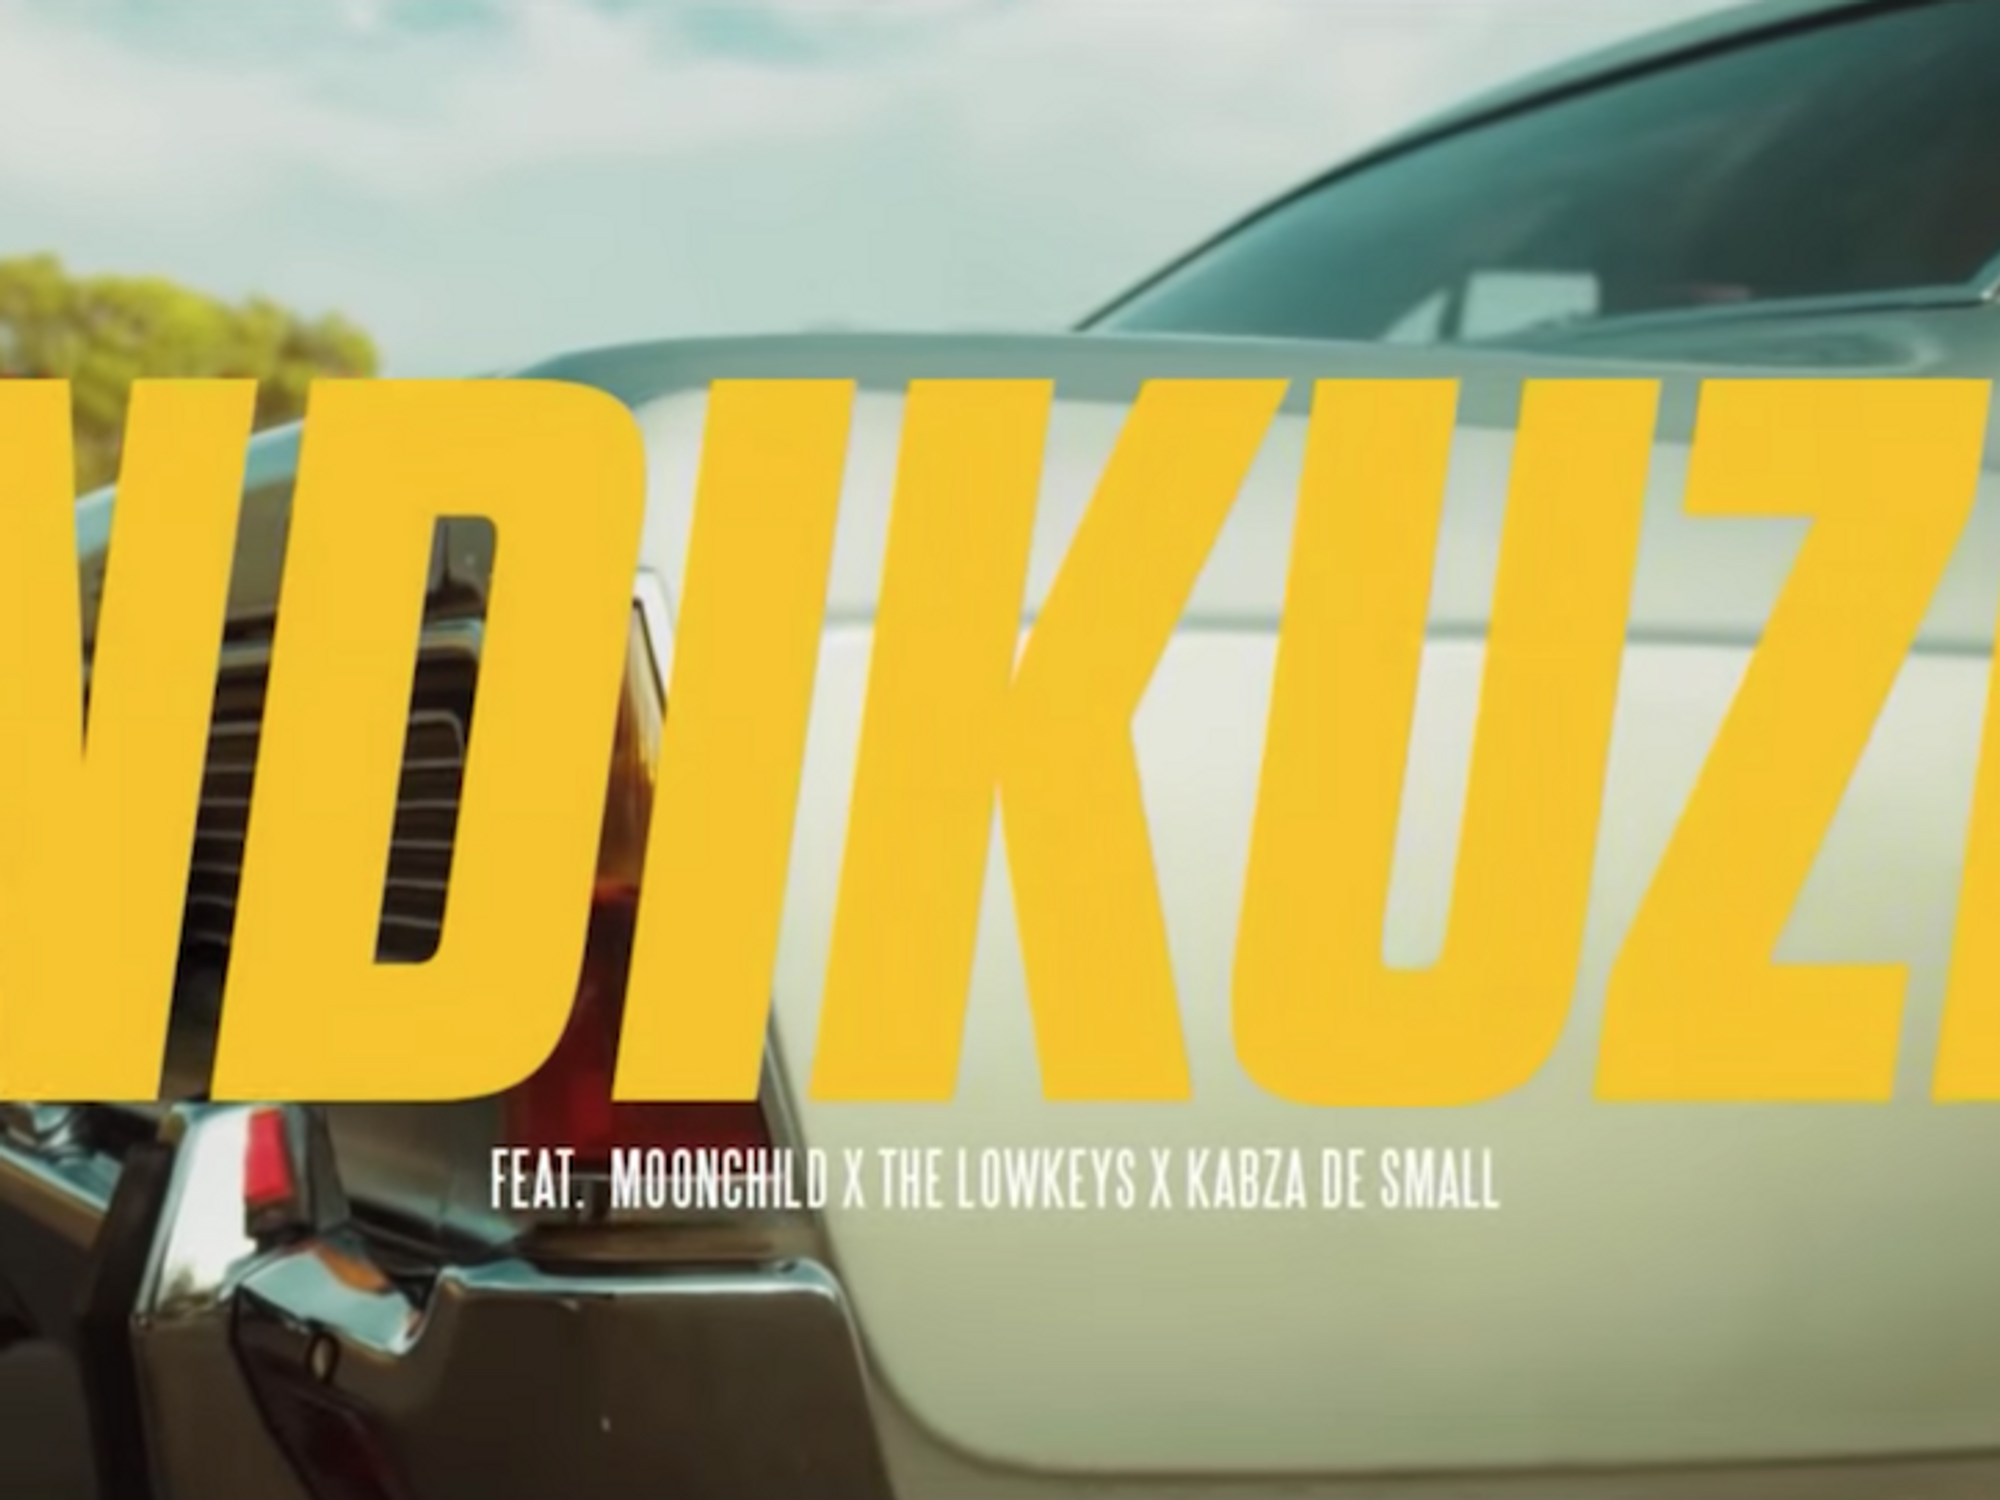 Watch the Music Video for Major League DJz and Focalistic’s Amapiano Banger ‘Ndikuze’ Featuring Moonchild Sanelly, Kabza De Small and The Lowkeys